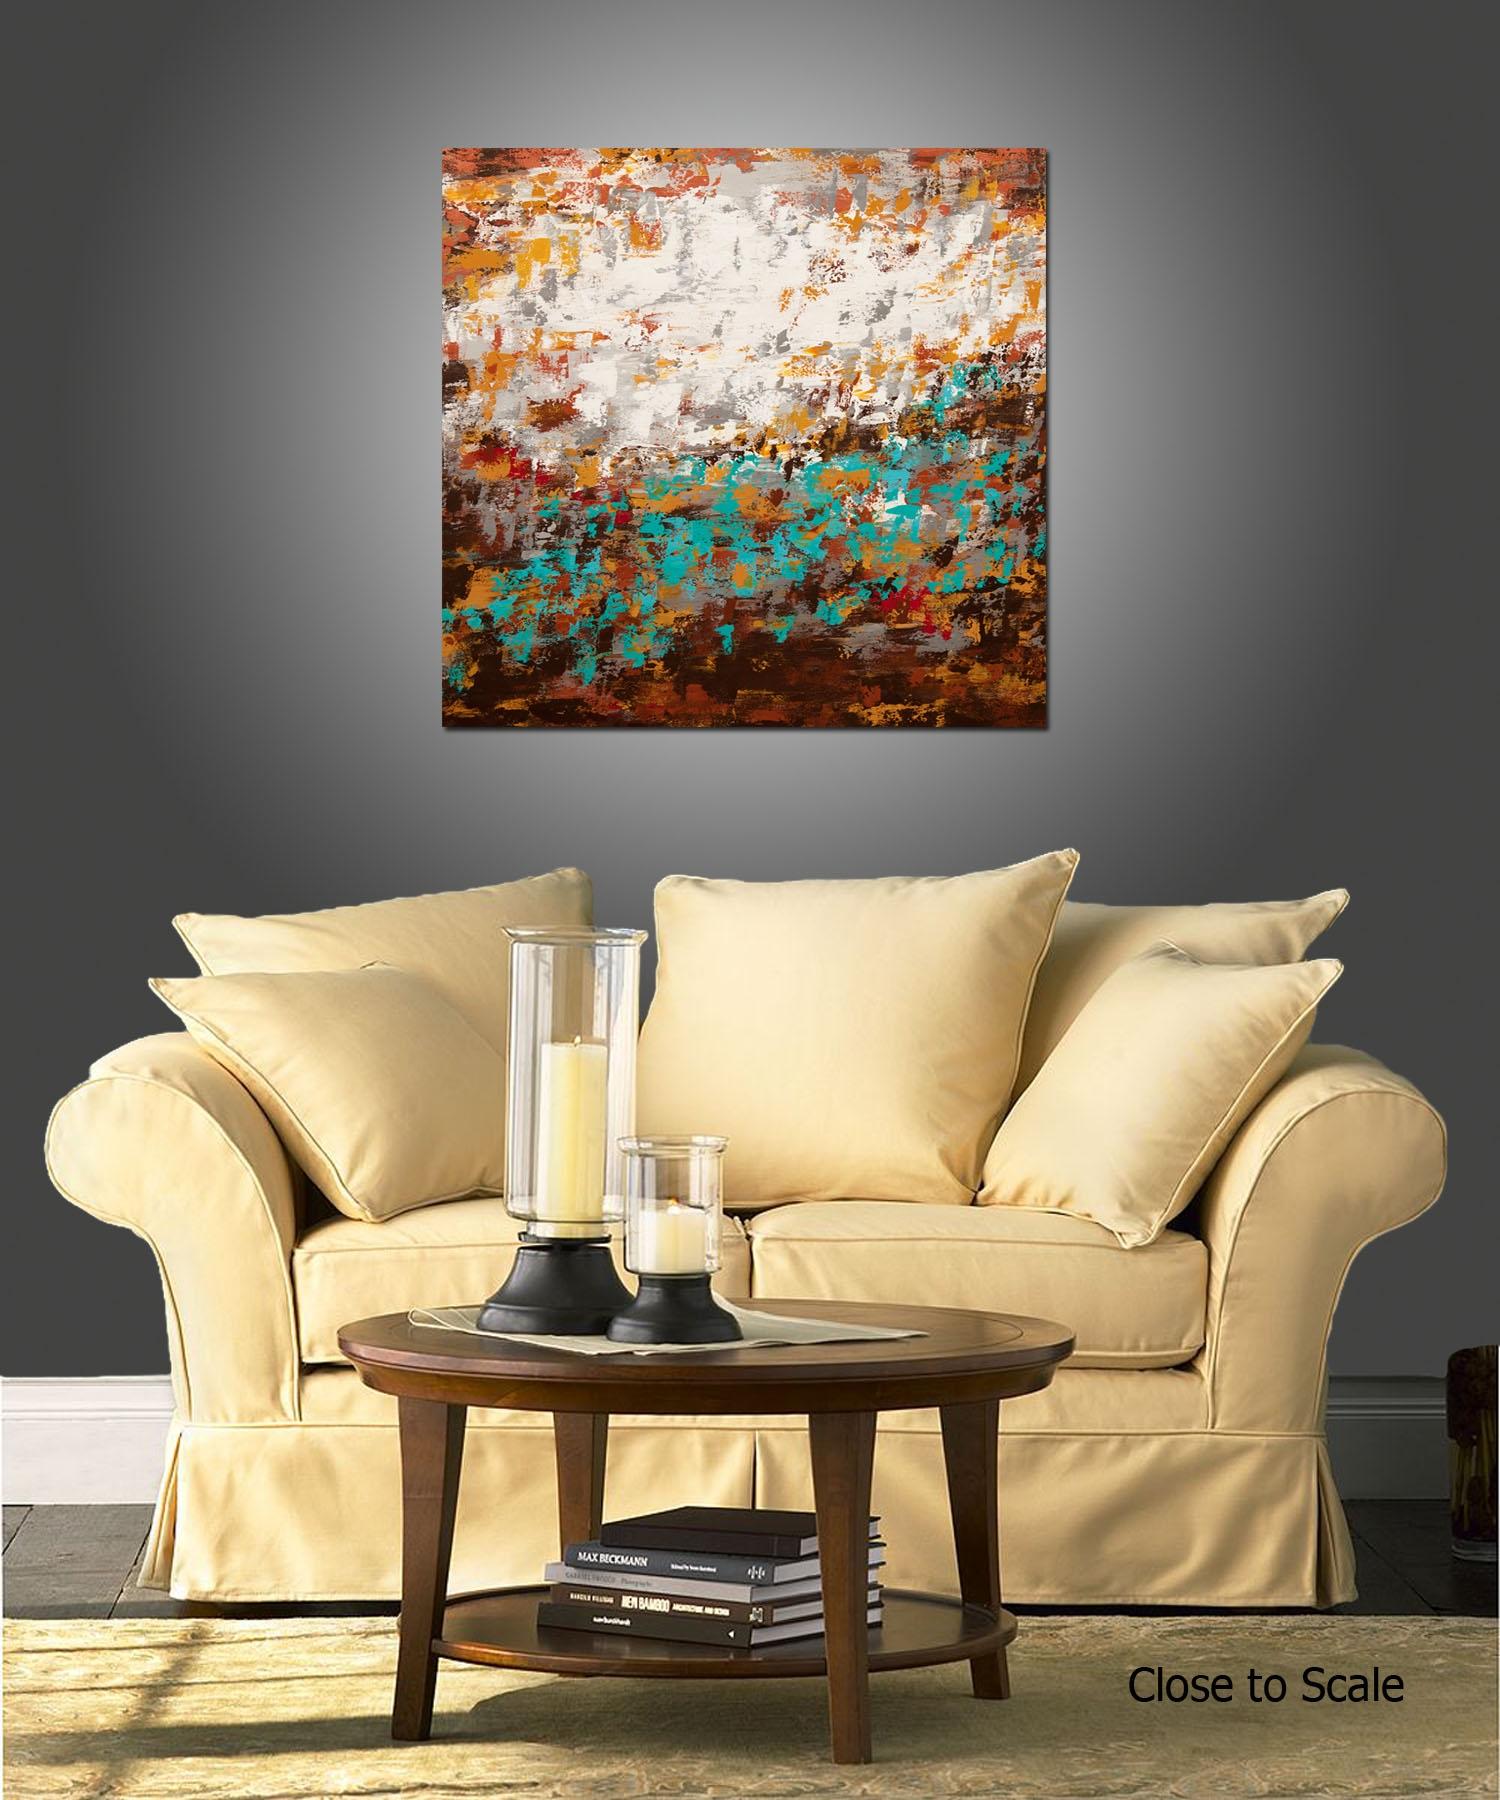 Modern Industrial 9 is an original, modern art painting from the Modern Industrial series. This one-of-a-kind painting was created with acrylic paint on gallery-wrapped canvas. It has a width of 36 inches and a height of 36 inches with a depth of 1